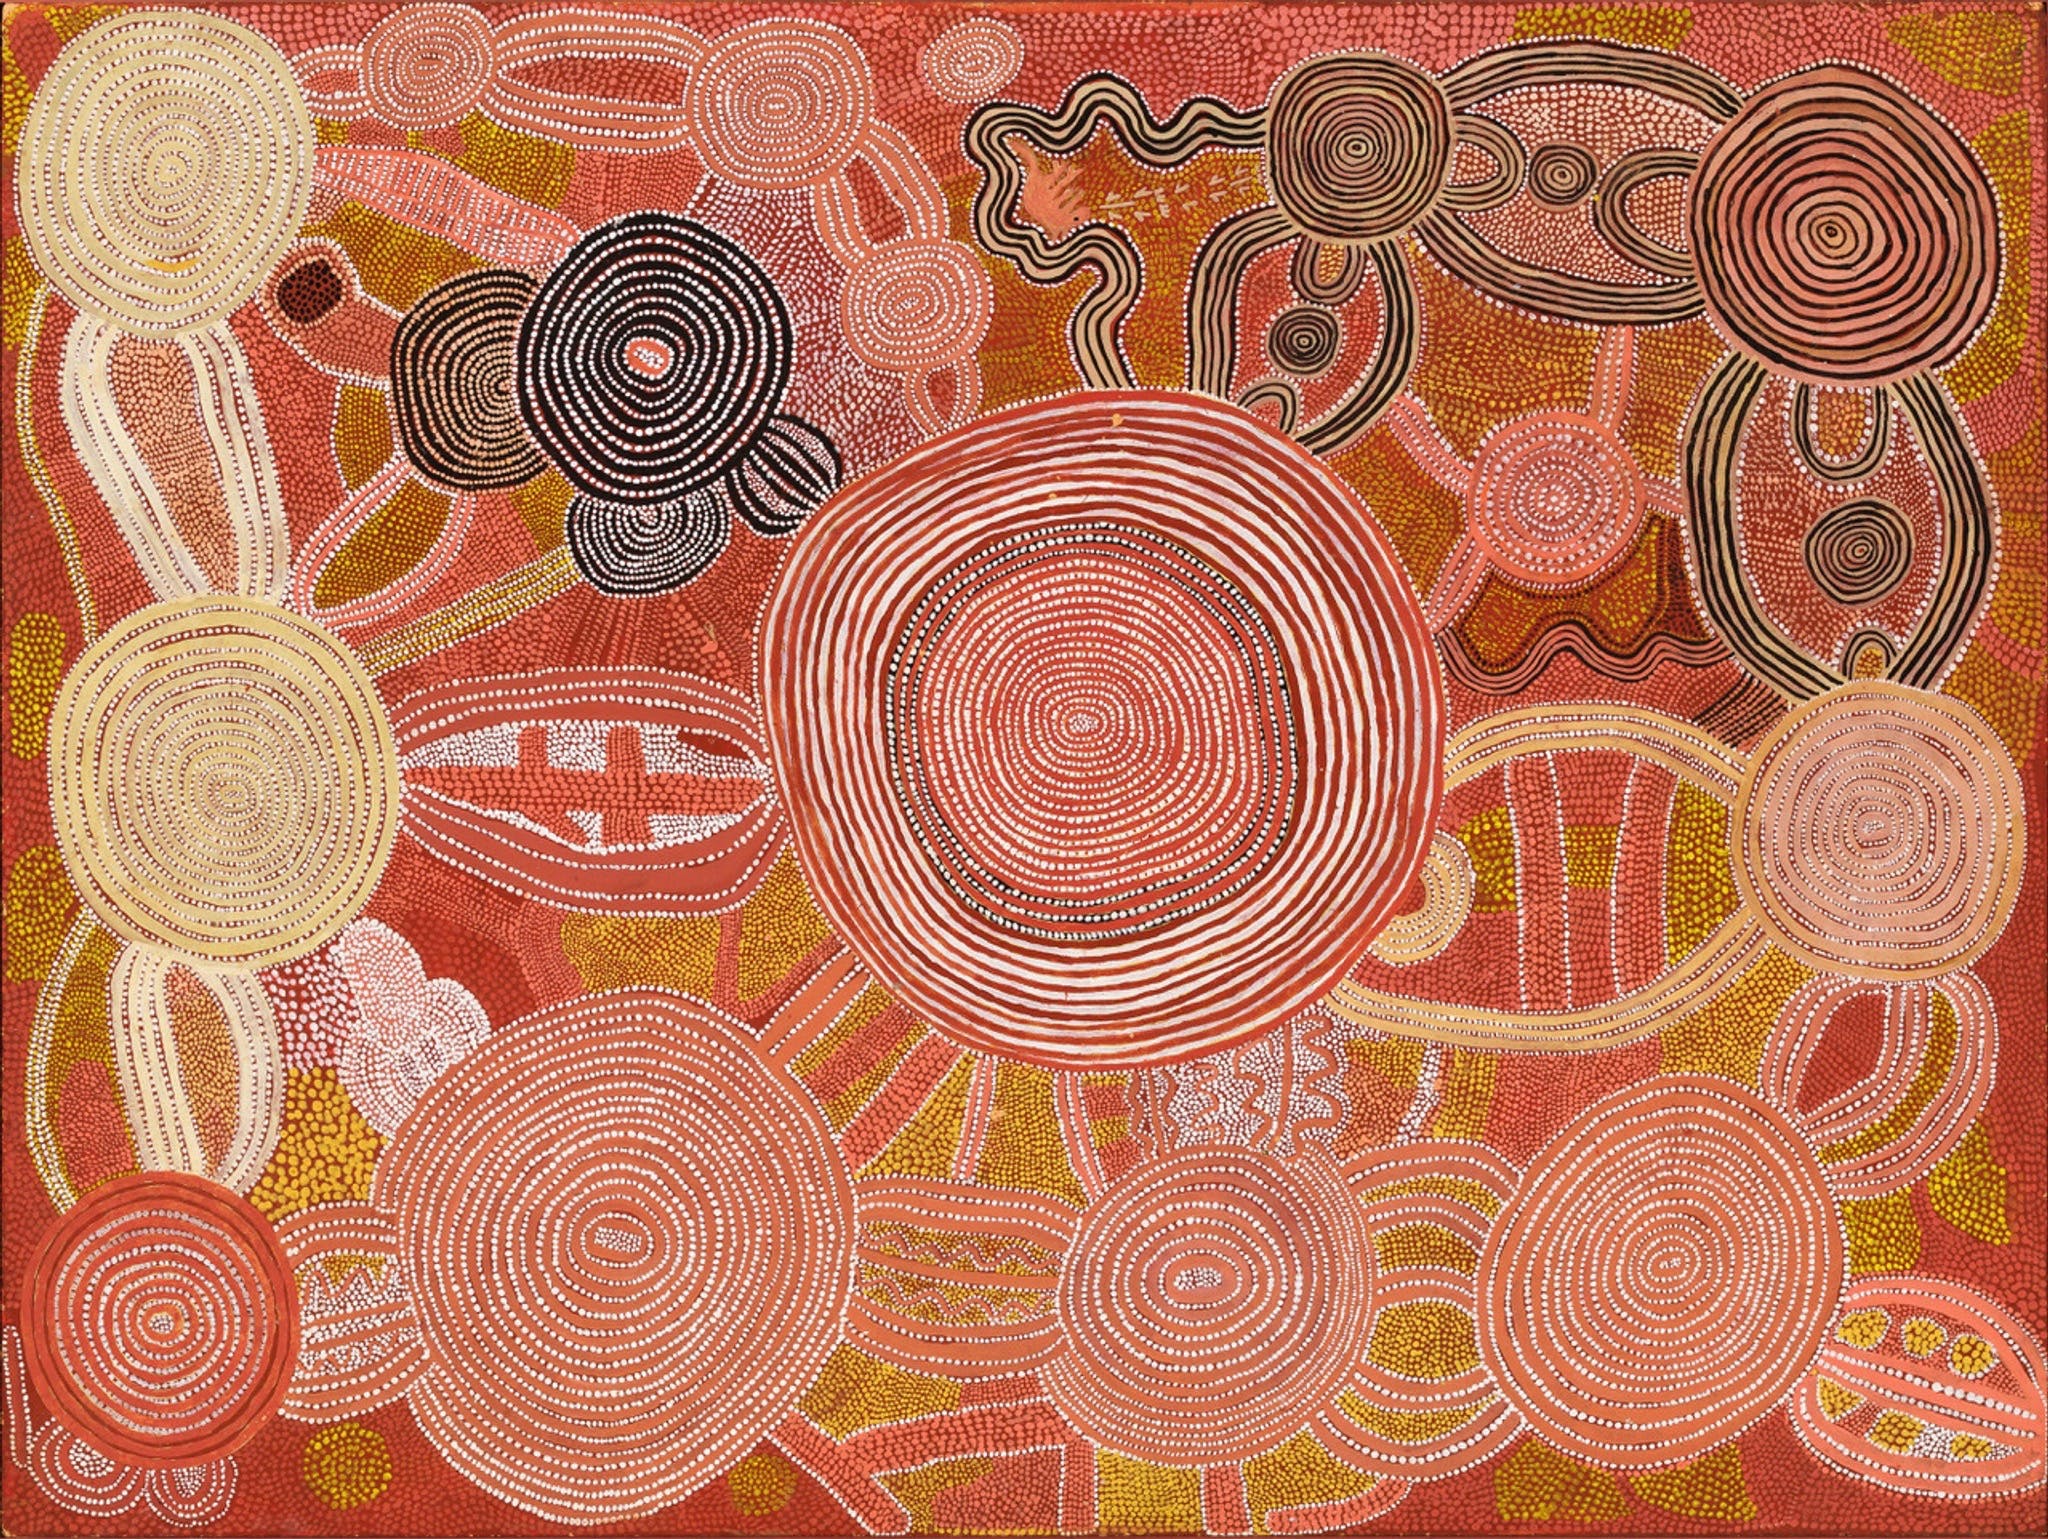 Reverence Exhibition of Australian Indigenous Art - Townsville Tourism